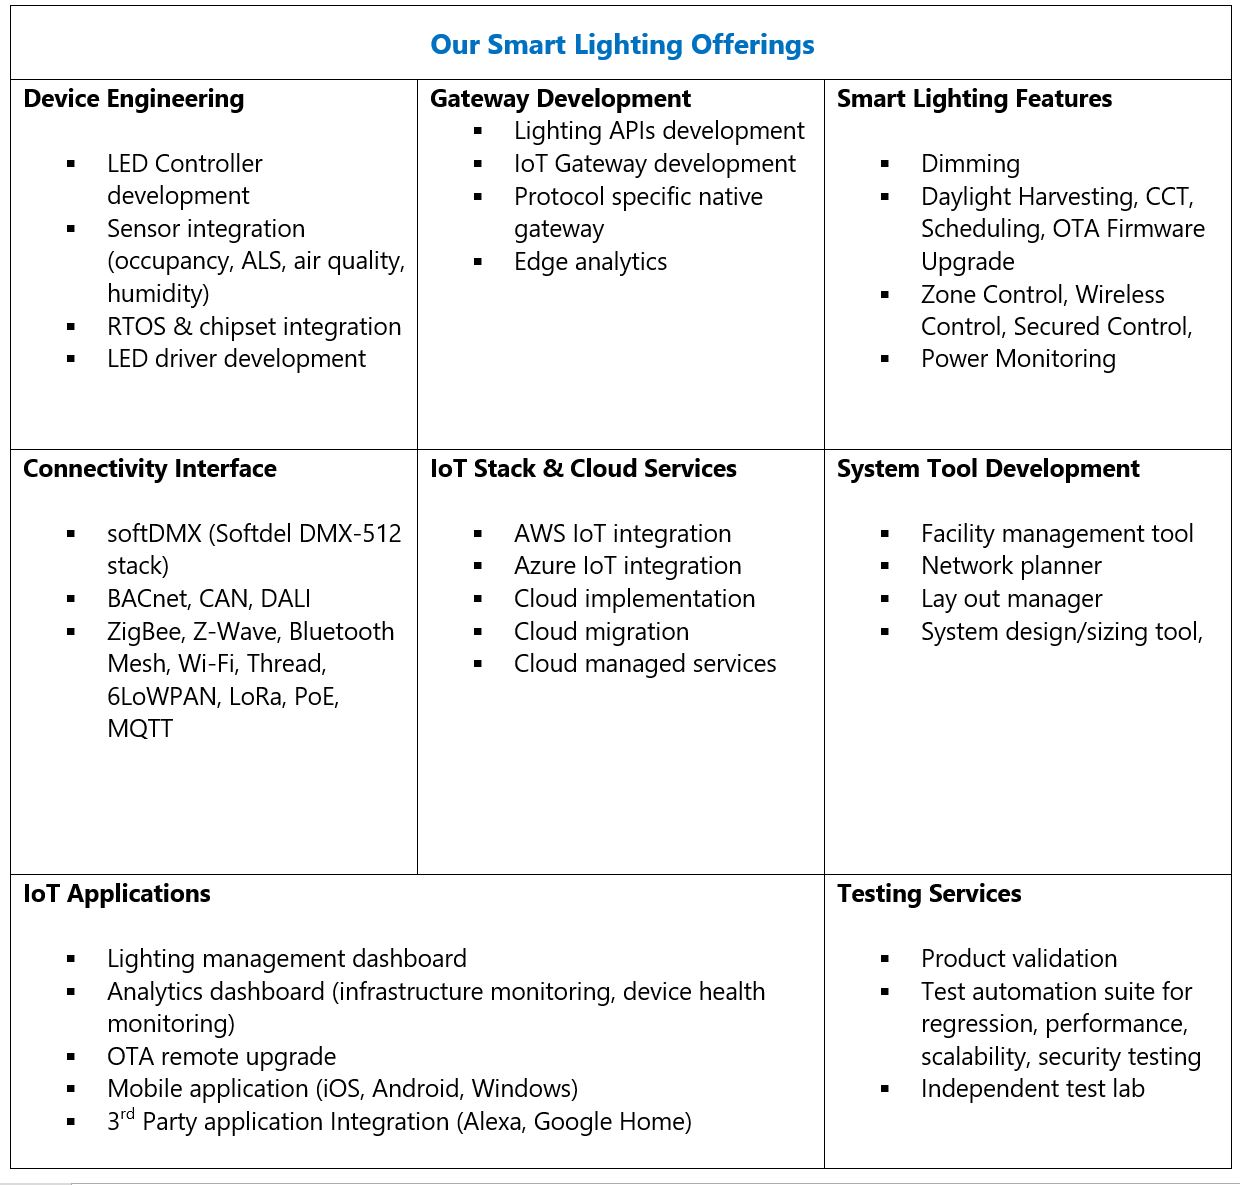 Our Smart Lighting Offerings